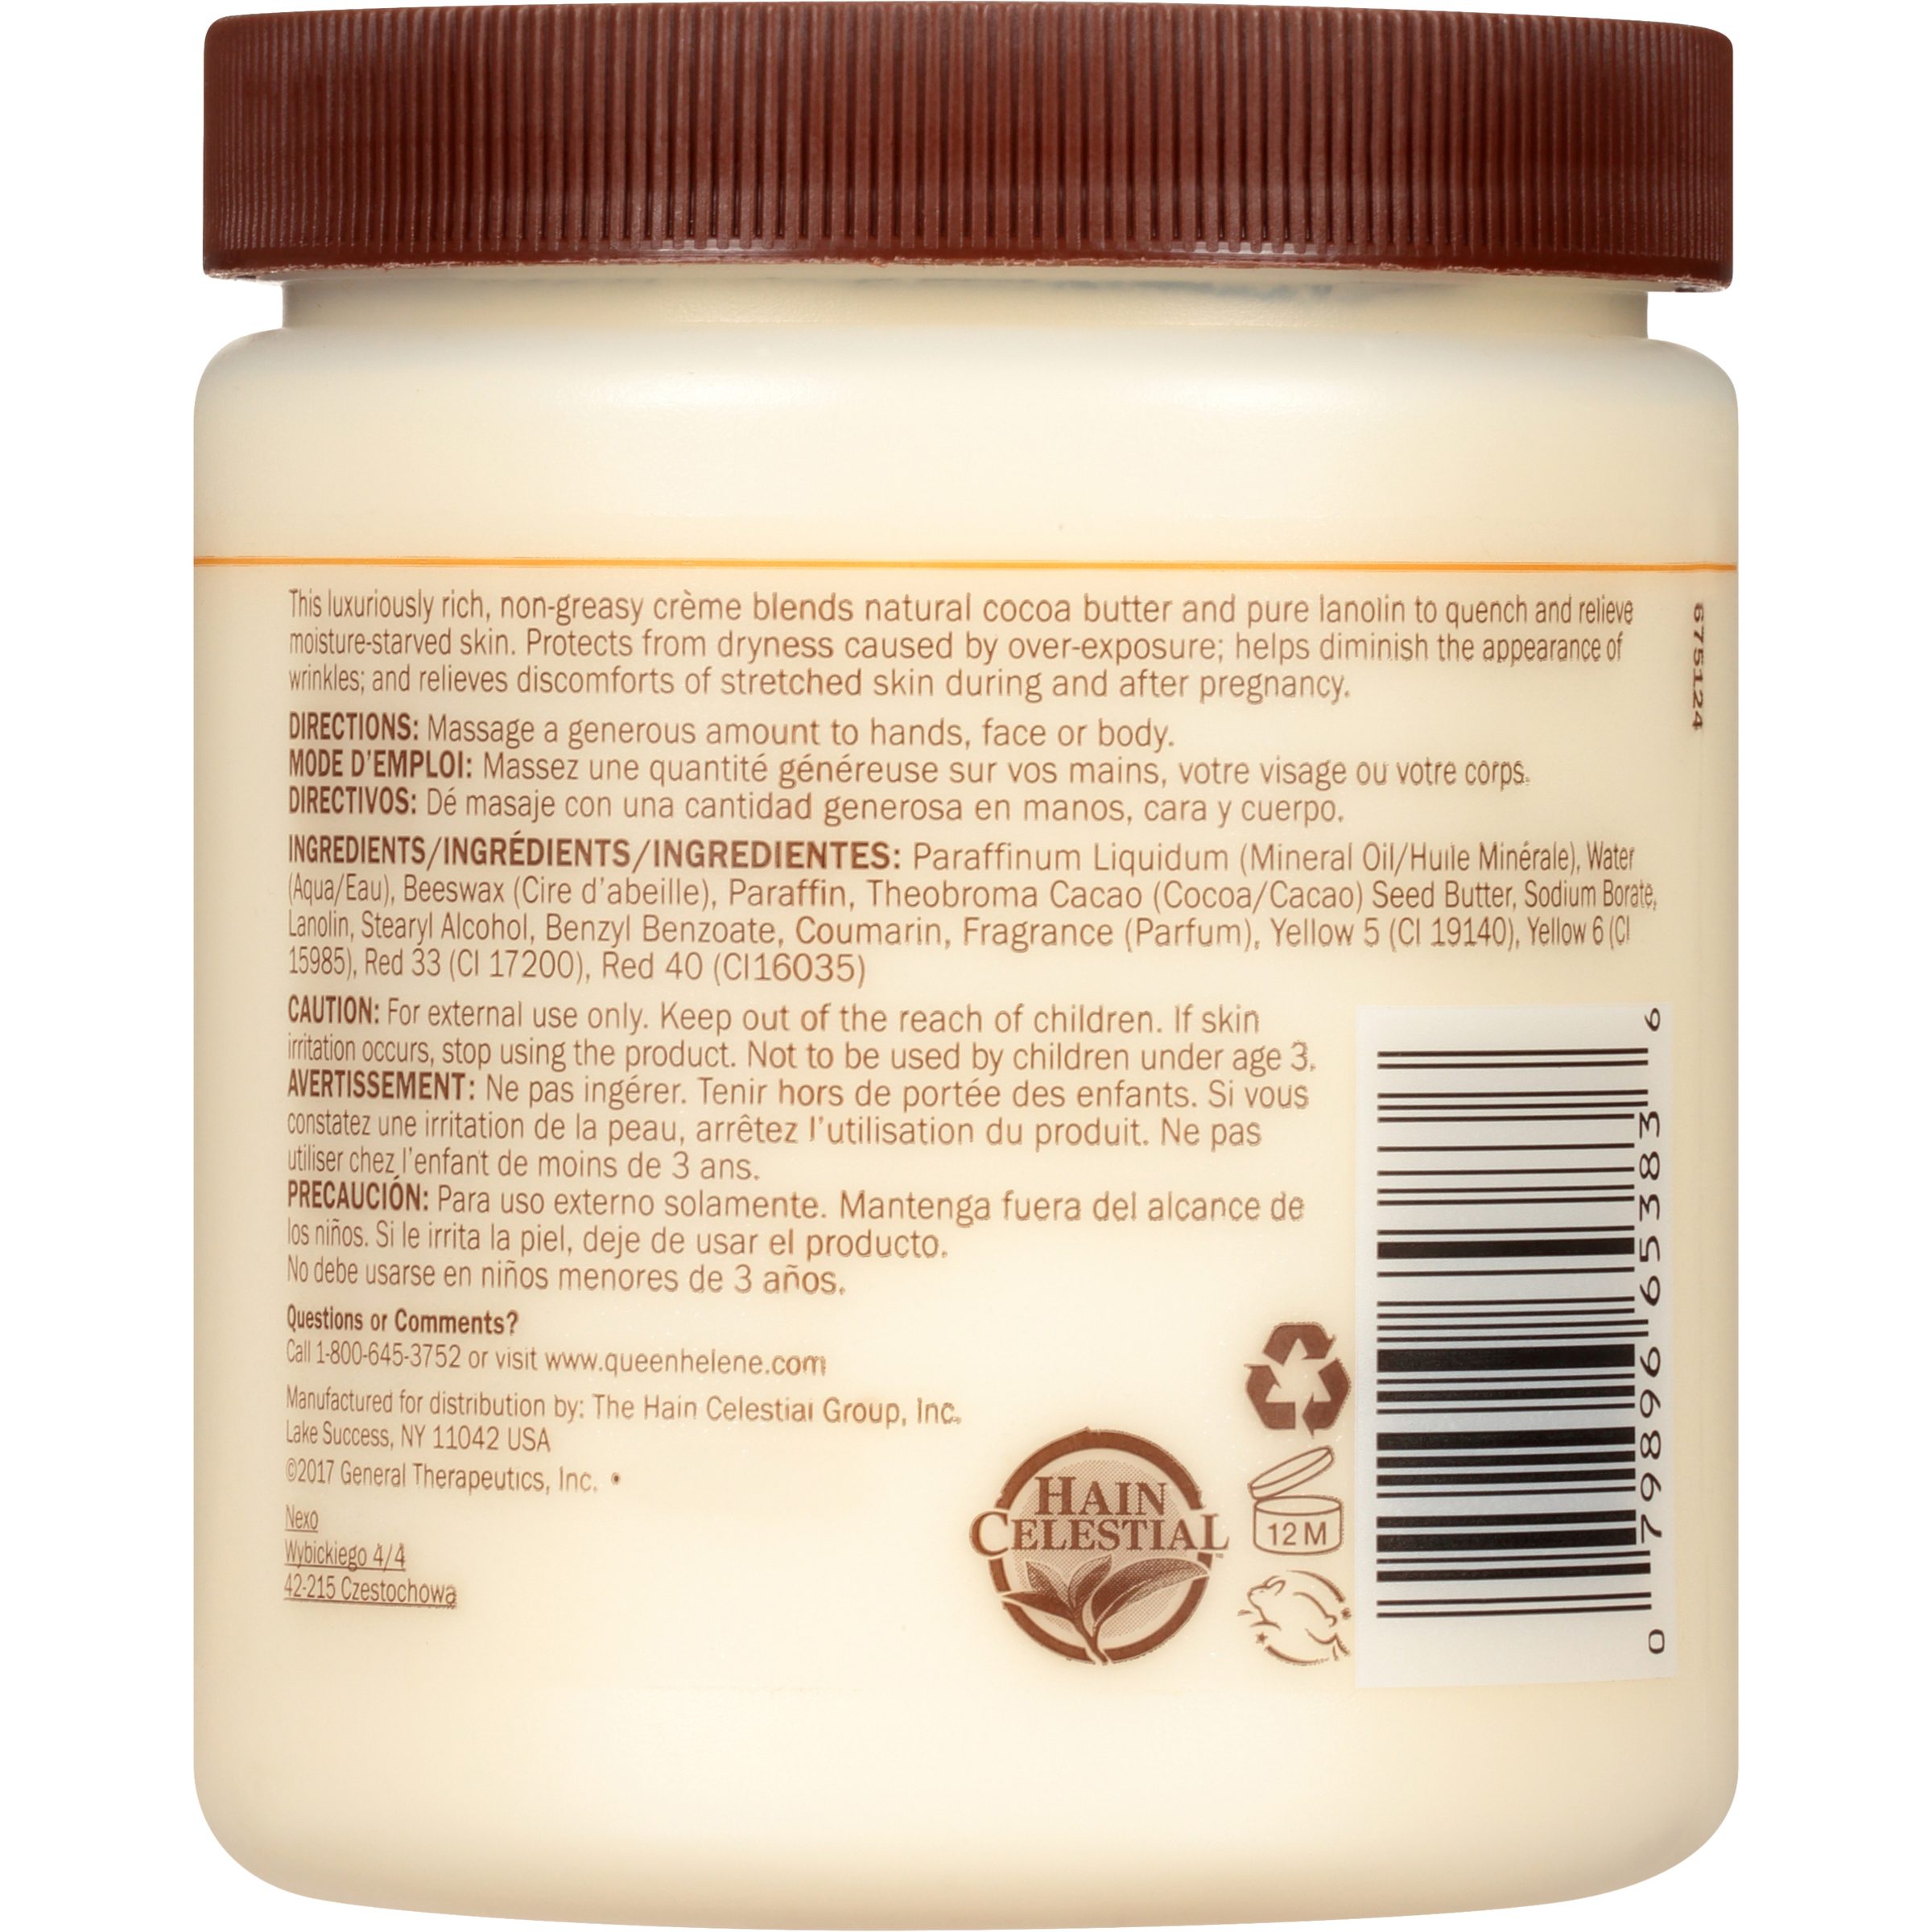 Queen Helene Cocoa Butter Crème Face & Body Lotion for Dry Skin, 15 oz - image 2 of 6